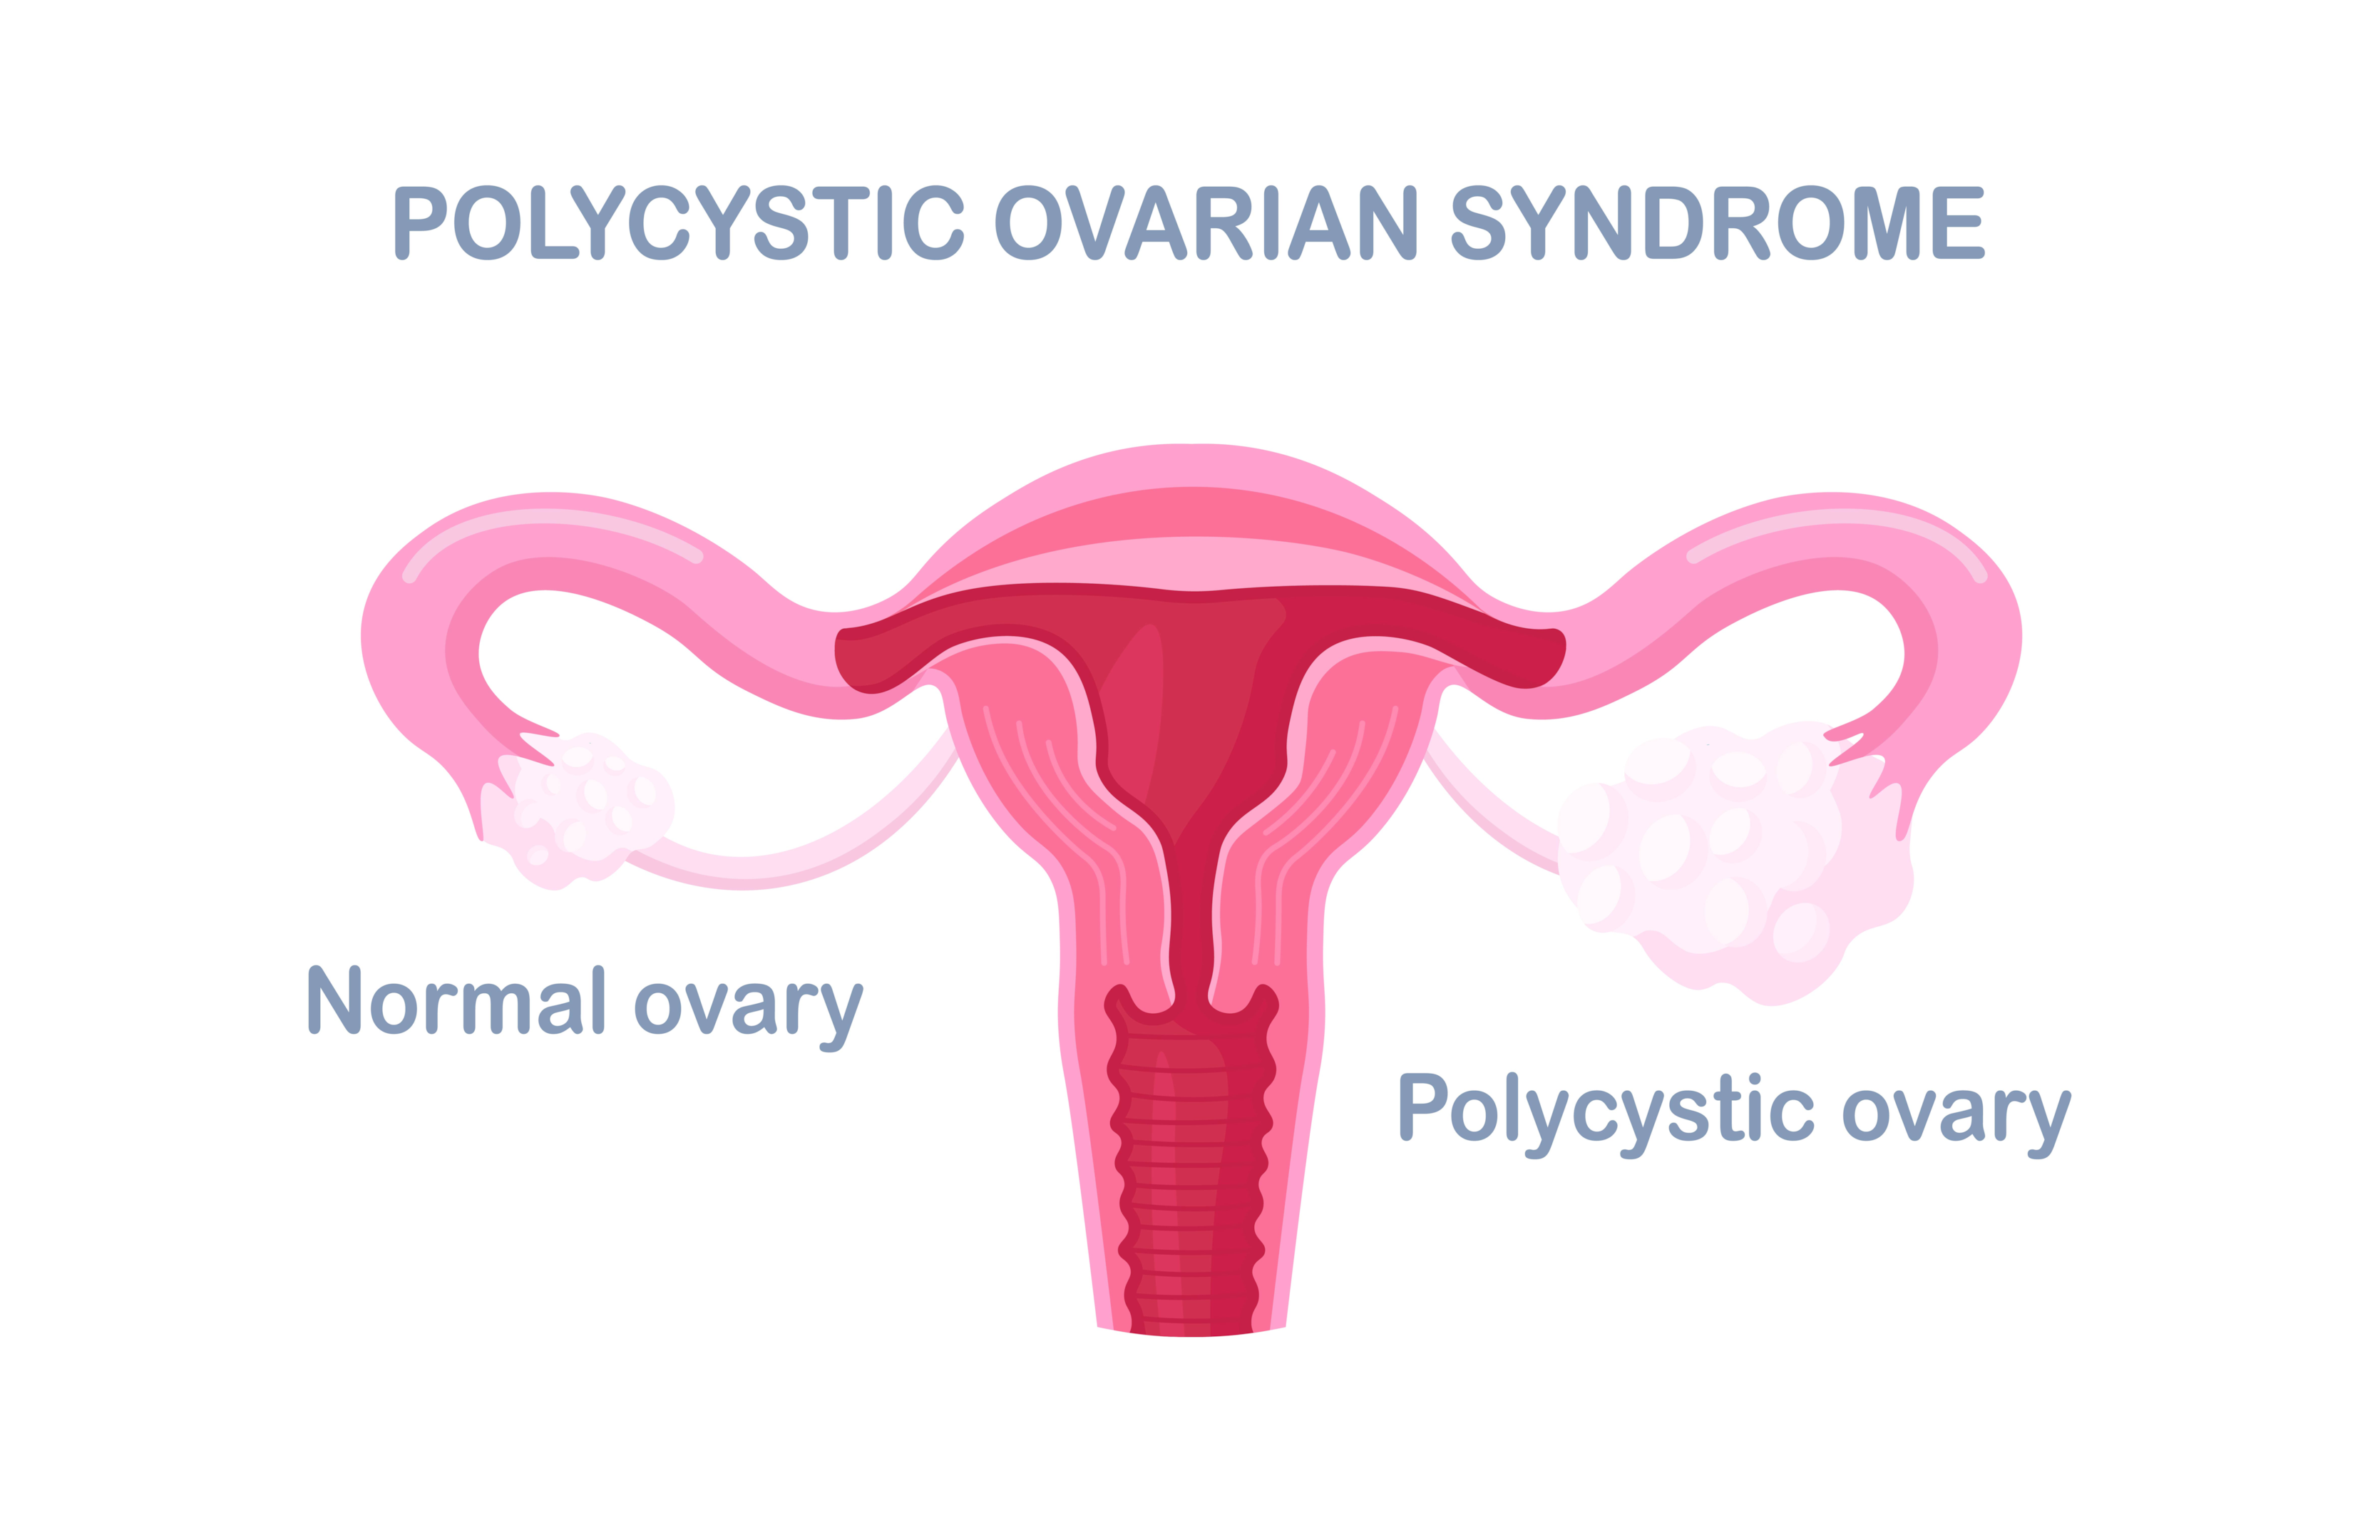 Illustrates of a polycystic ovary against a normal ovary.